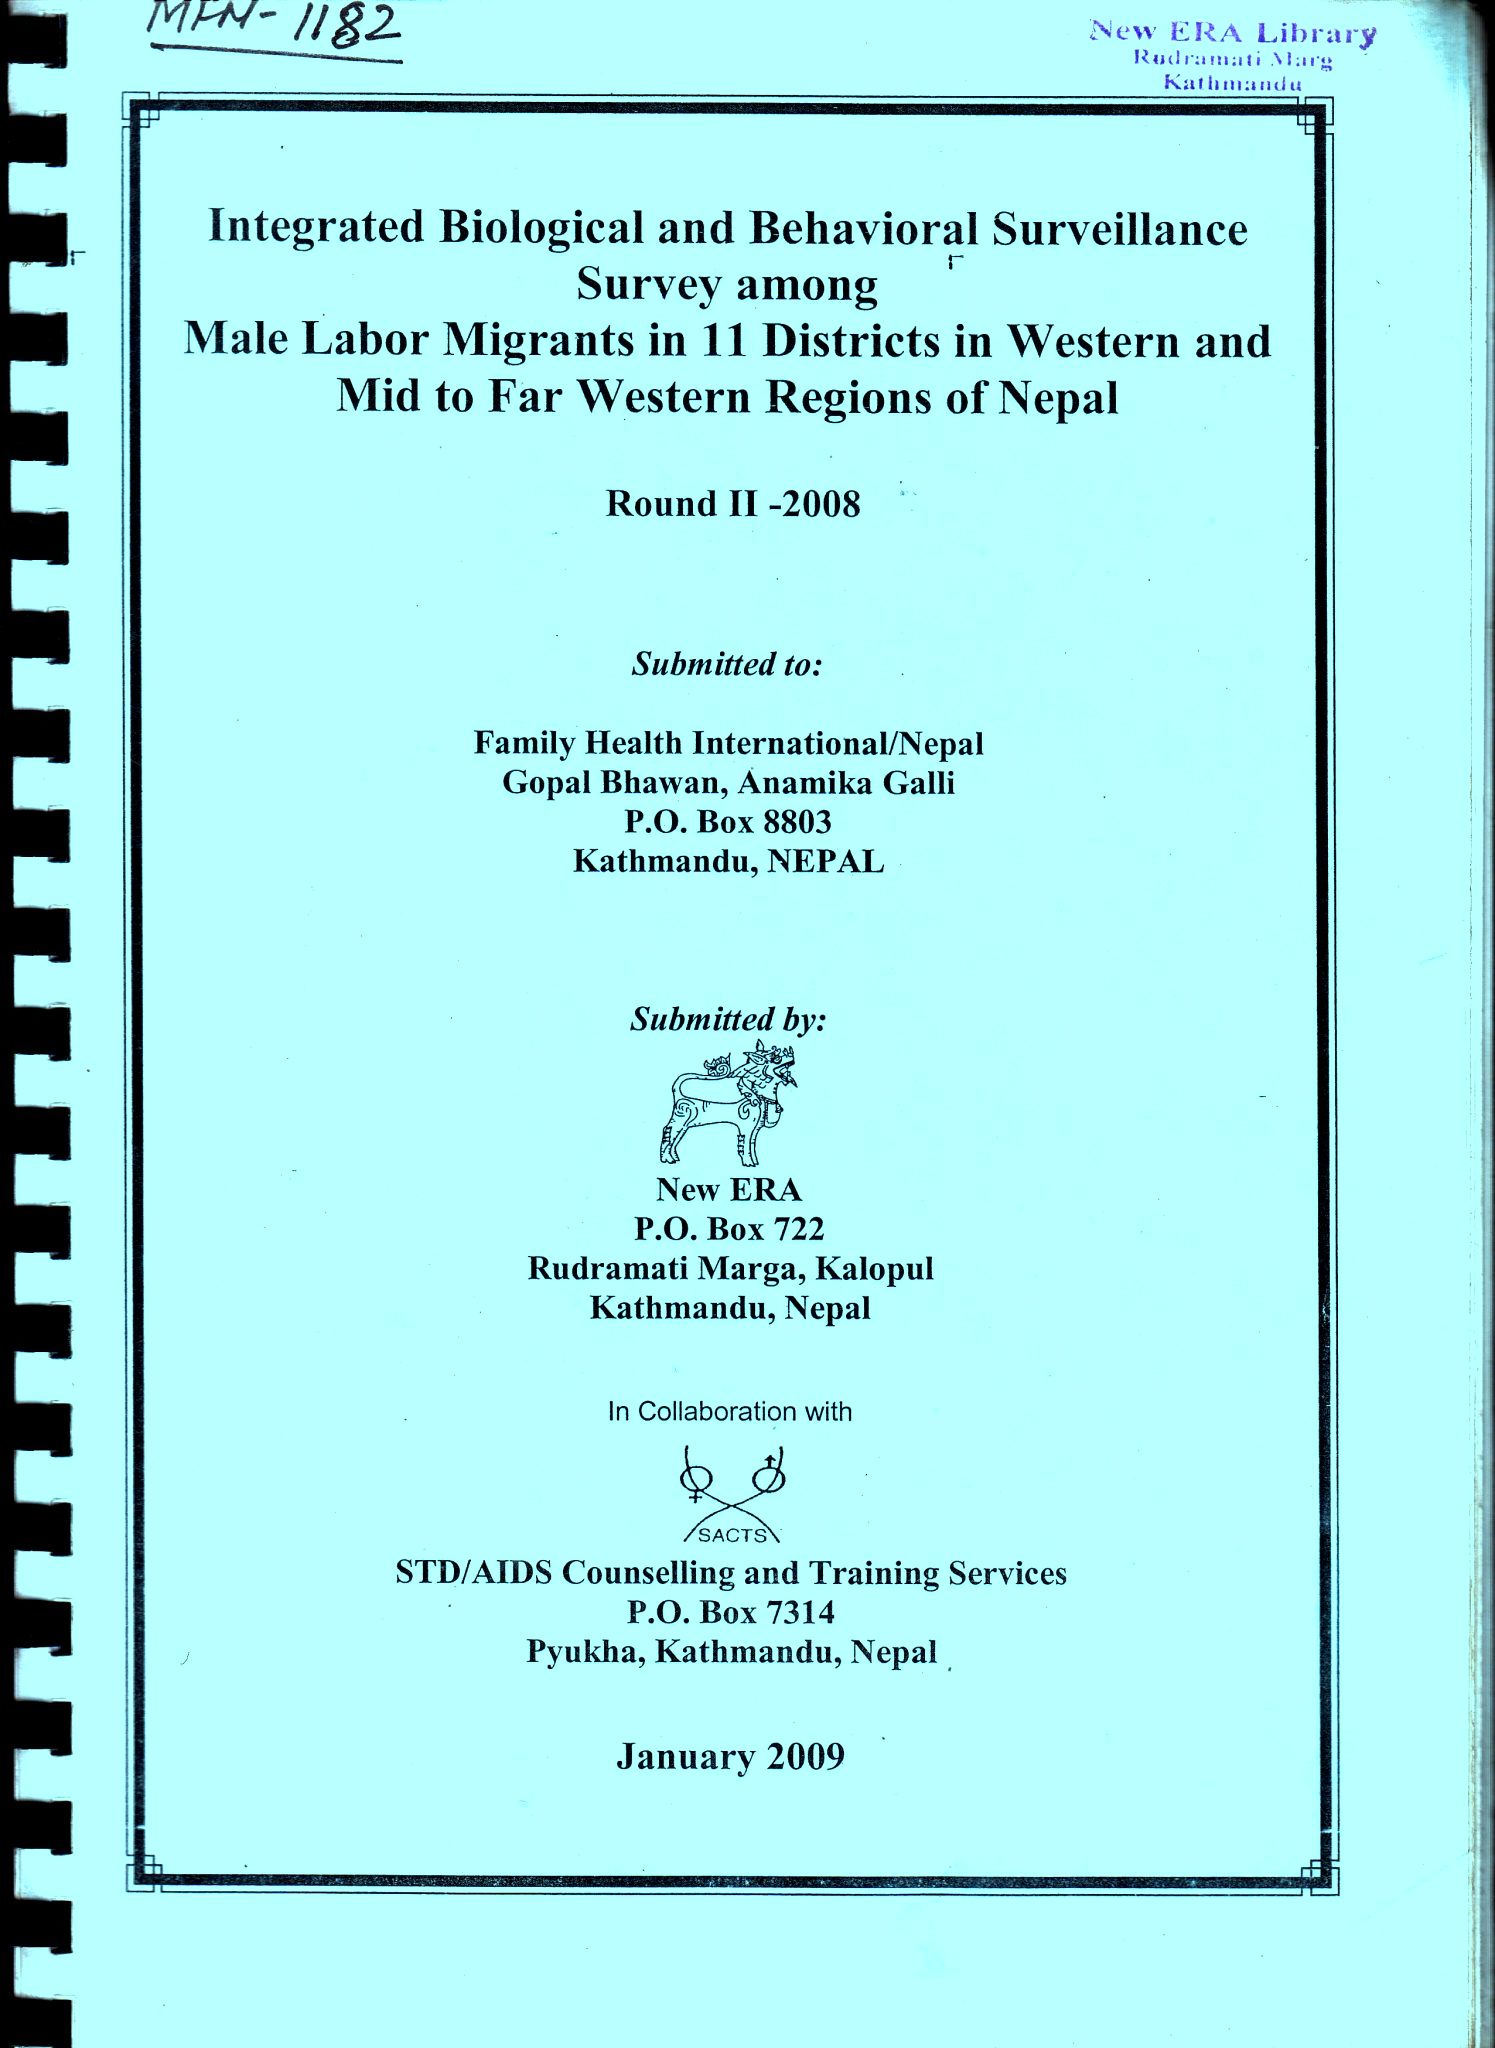 Integrated Biological Behavioral Surveillance Survey among Male Labor Migrants in 11 Districts in Western and Mid to Far Western Regions of Nepal, Round II – 2008